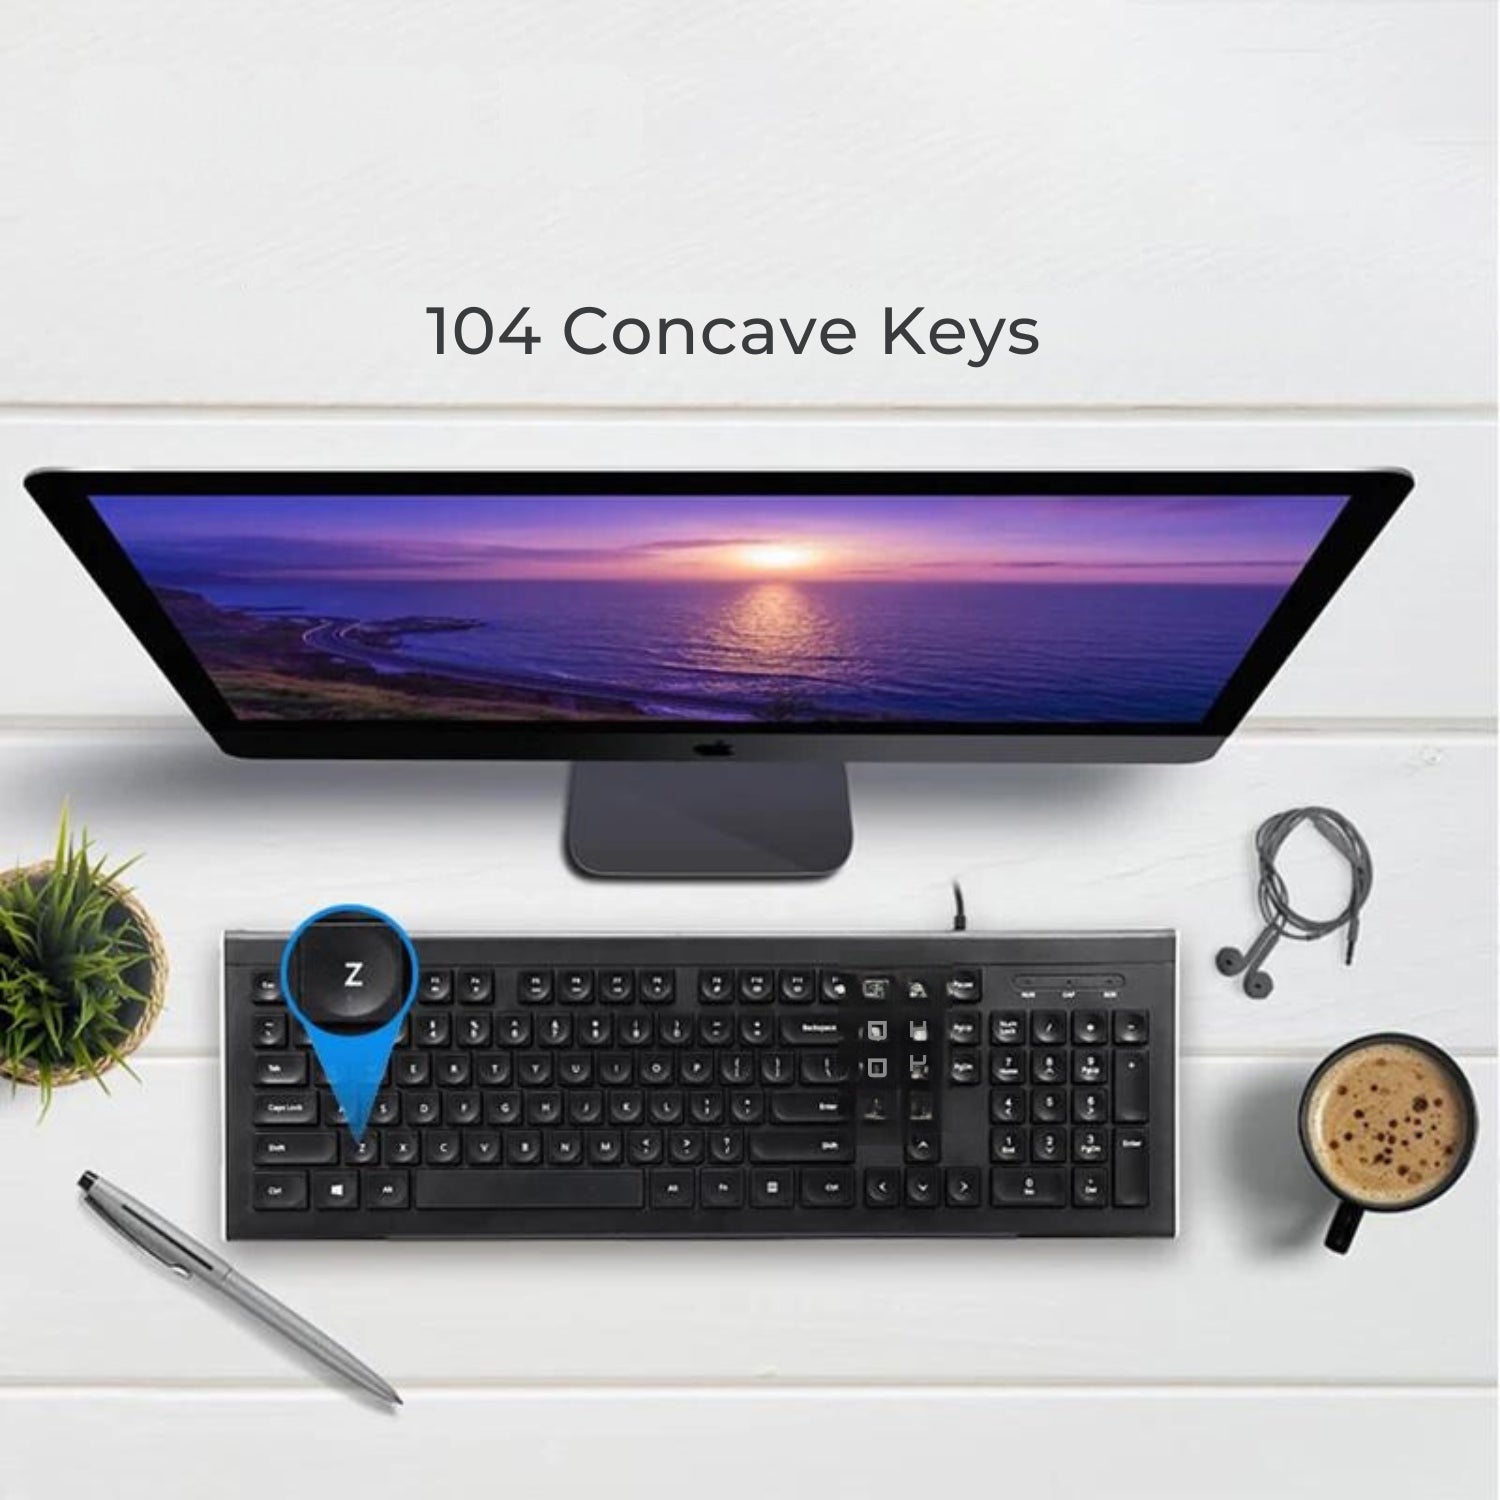 The image shows a Clevisco ergonomic keyboard with 104 concave keys in a clean workspace. The keyboard is under a monitor displaying a sunset. A cup of coffee and headphones are on the desk. The workspace is professional and organized, highlighting the keyboard’s functionality and style.